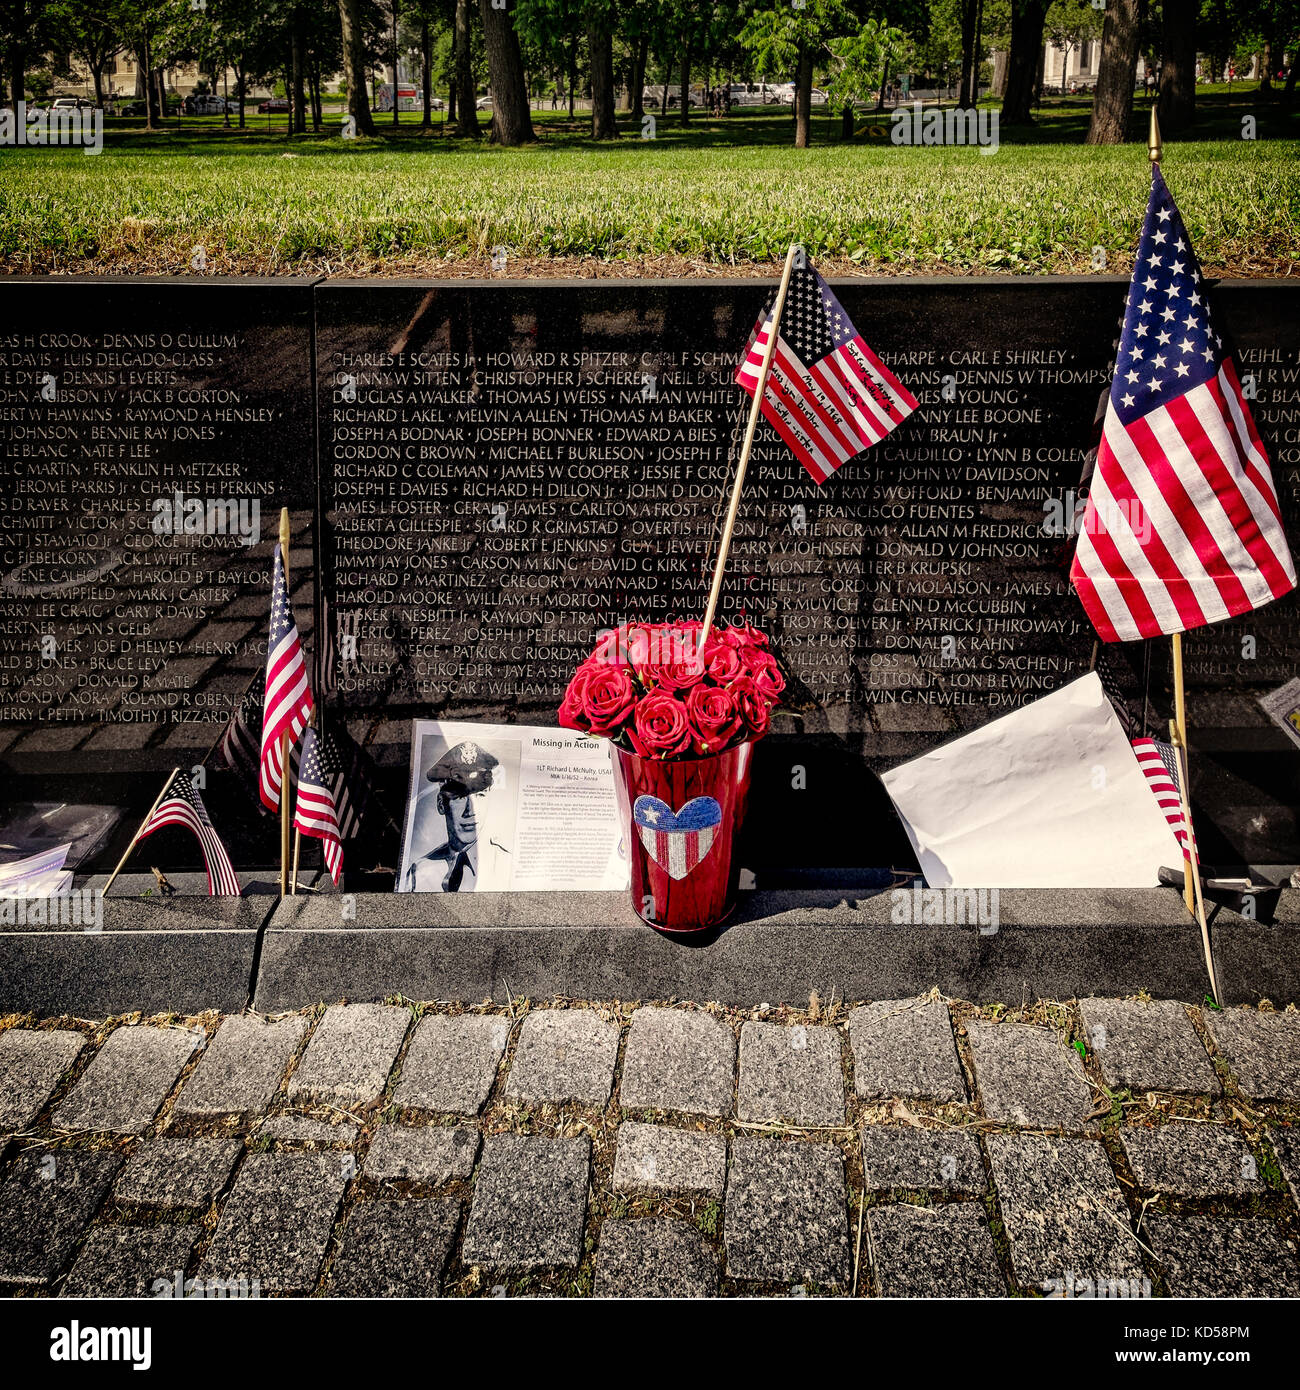 WASHINGTON DC-May 25, 2015: Vietnam Memorial viewed below ground level, with flags, messages and a pot of roses left on Memorial Day. Square Stock Photo